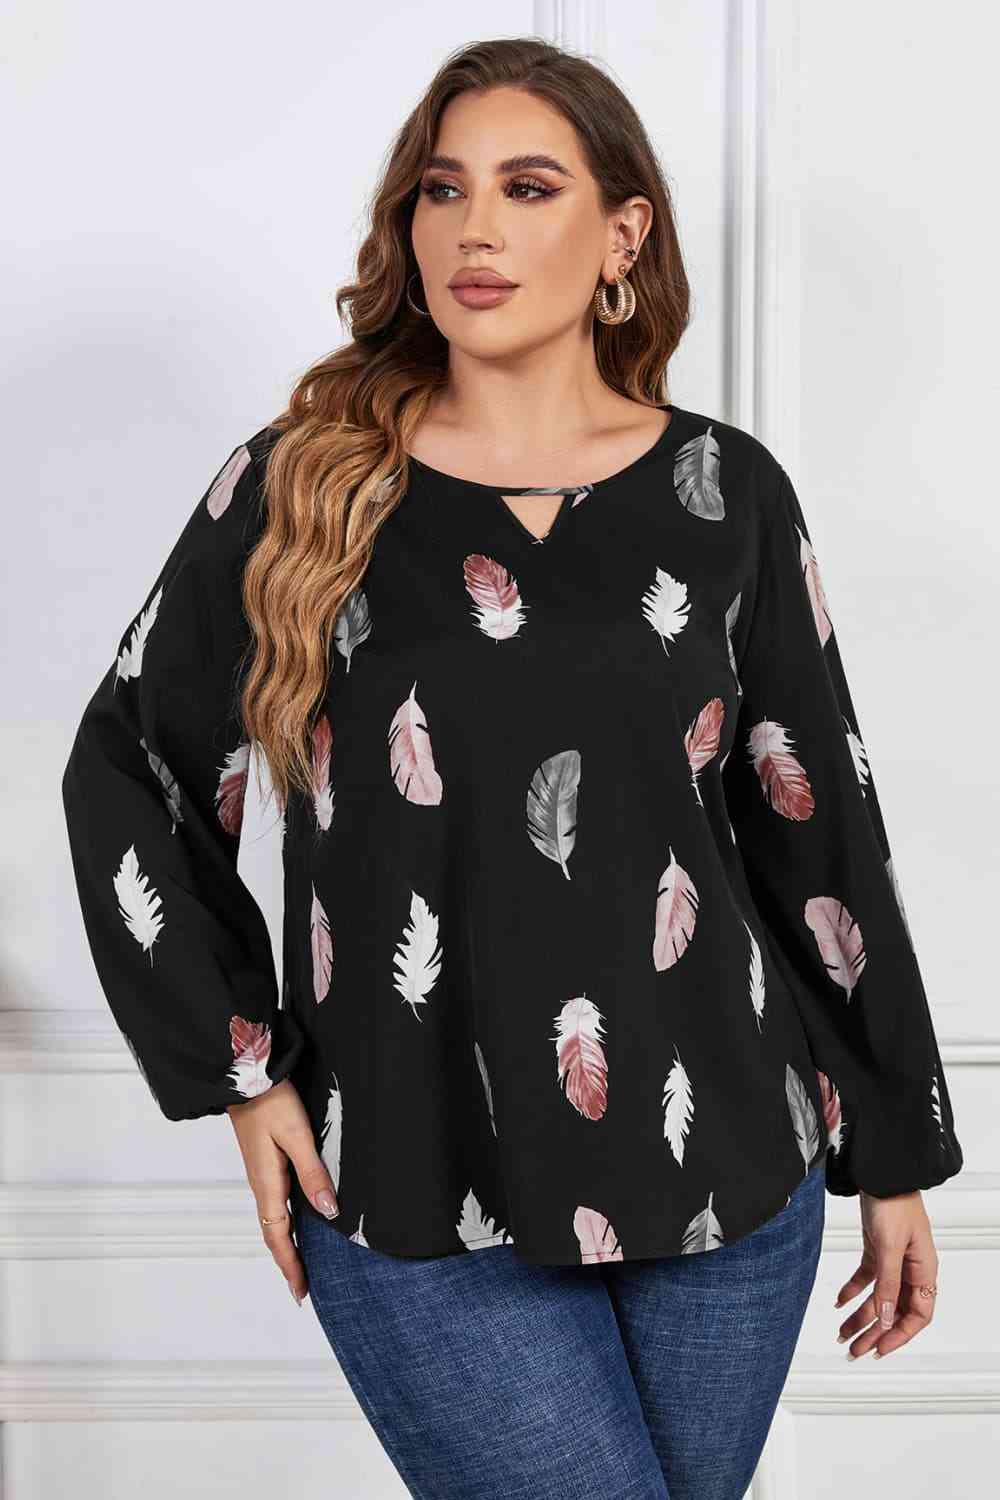 Melo Apparel Plus Size Printed Round Neck Long Sleeve Cutout Blouse Black